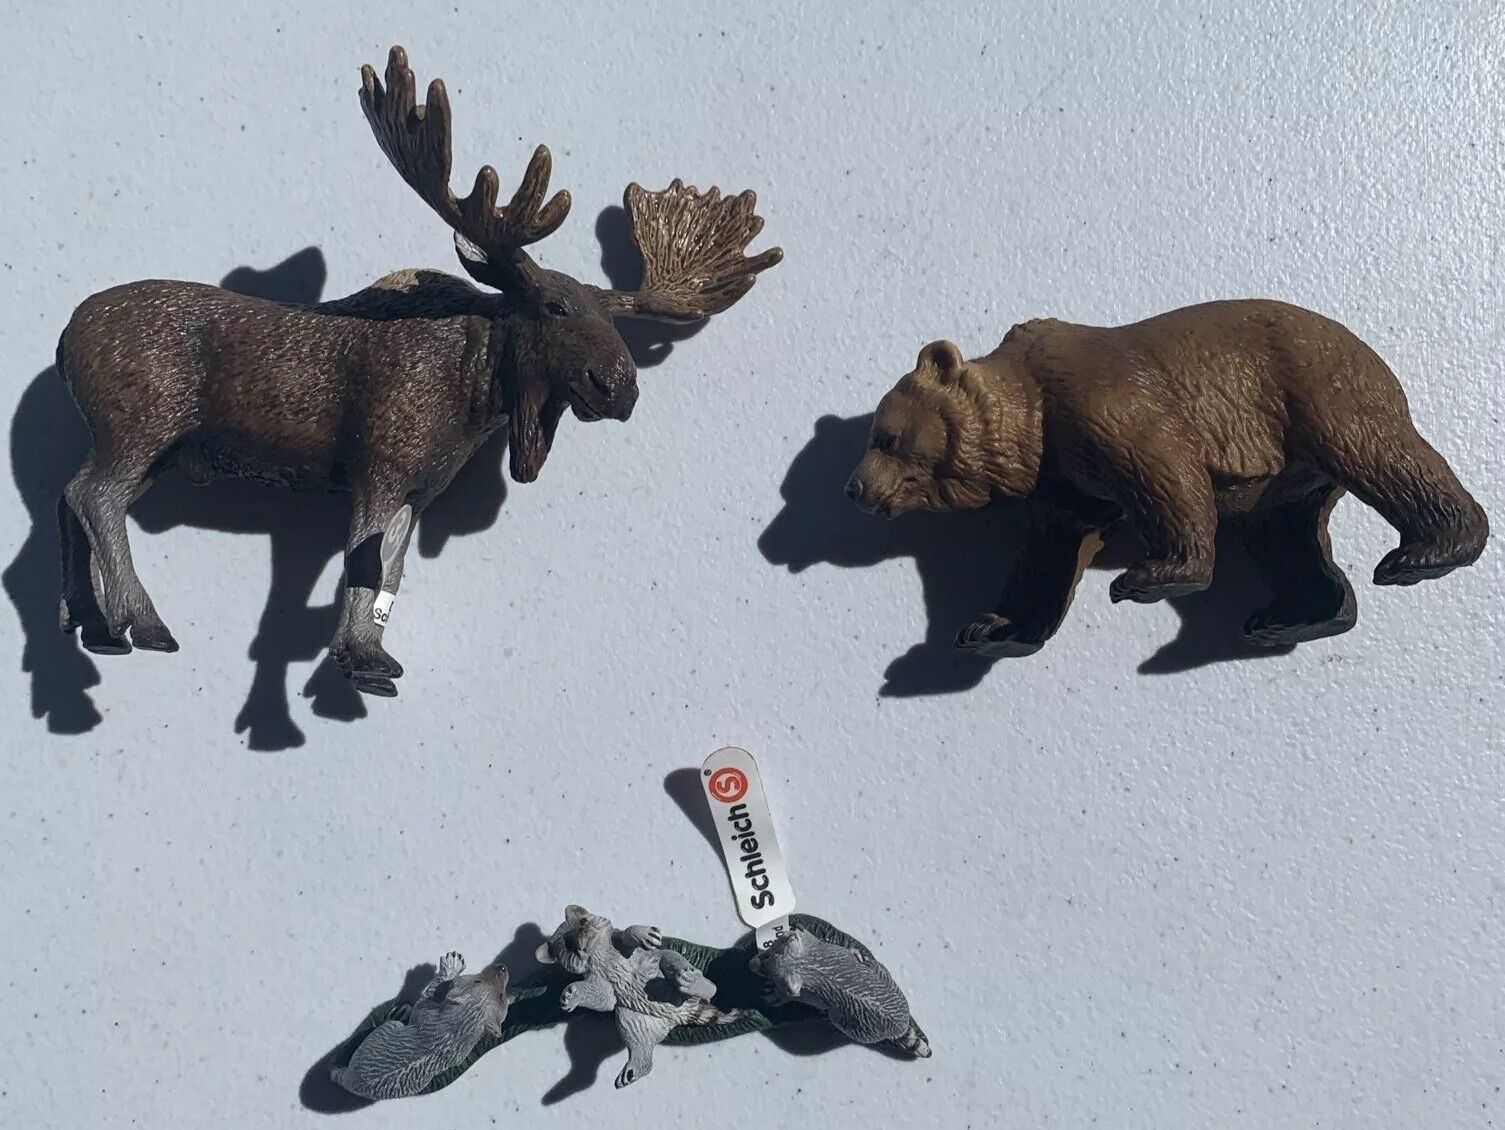 Schleich Animal lot of 3 Moose Raccoons And Bear